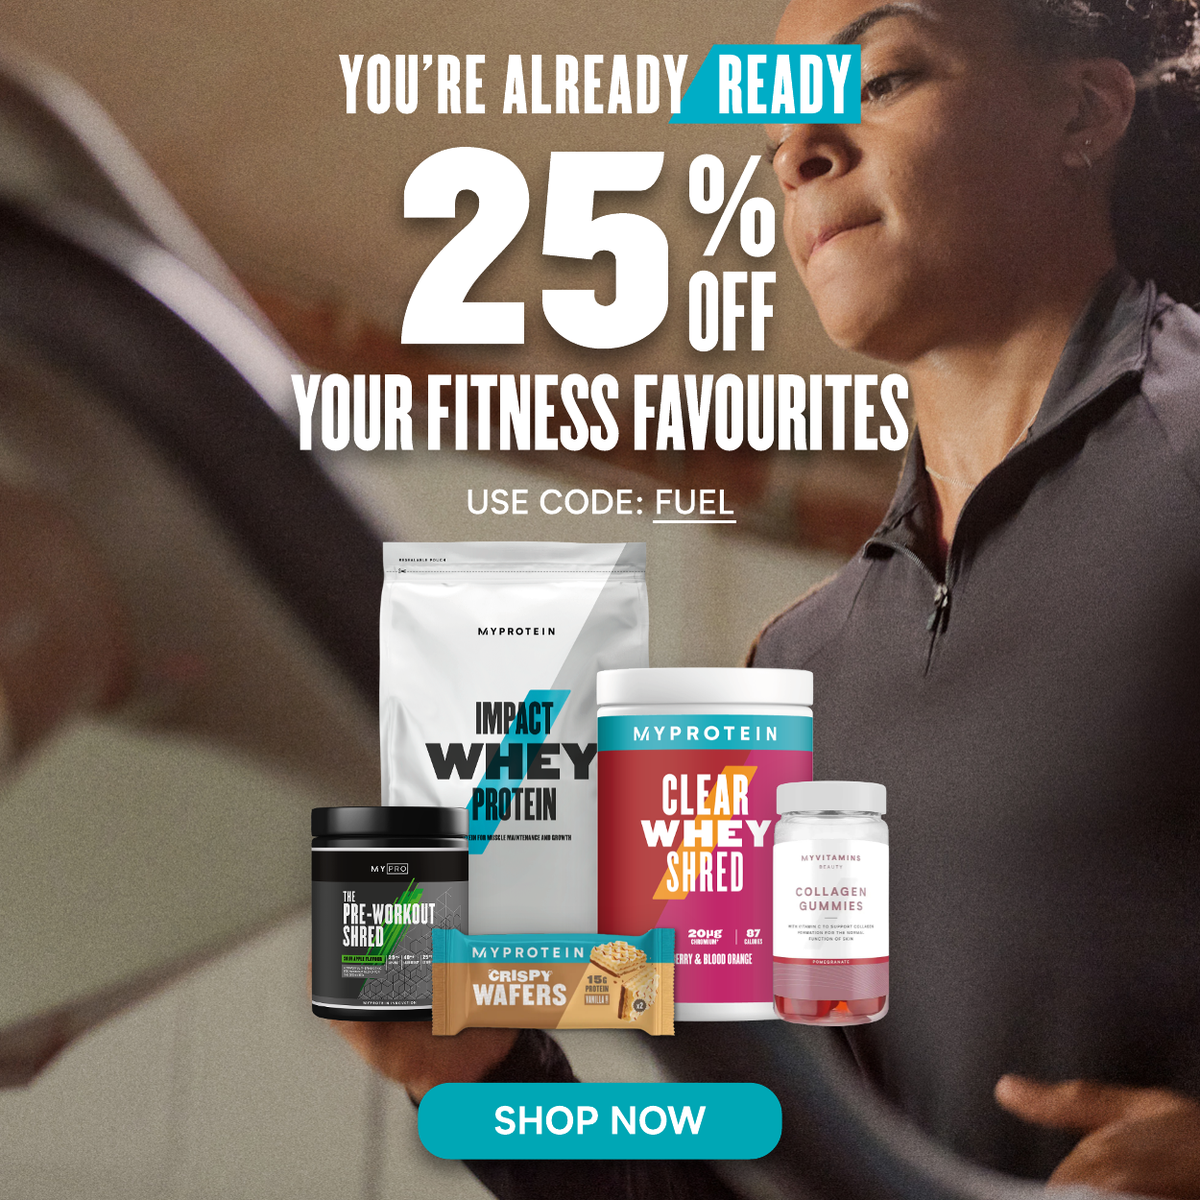 25% Off Your Fitness Favourites Code: FUEL